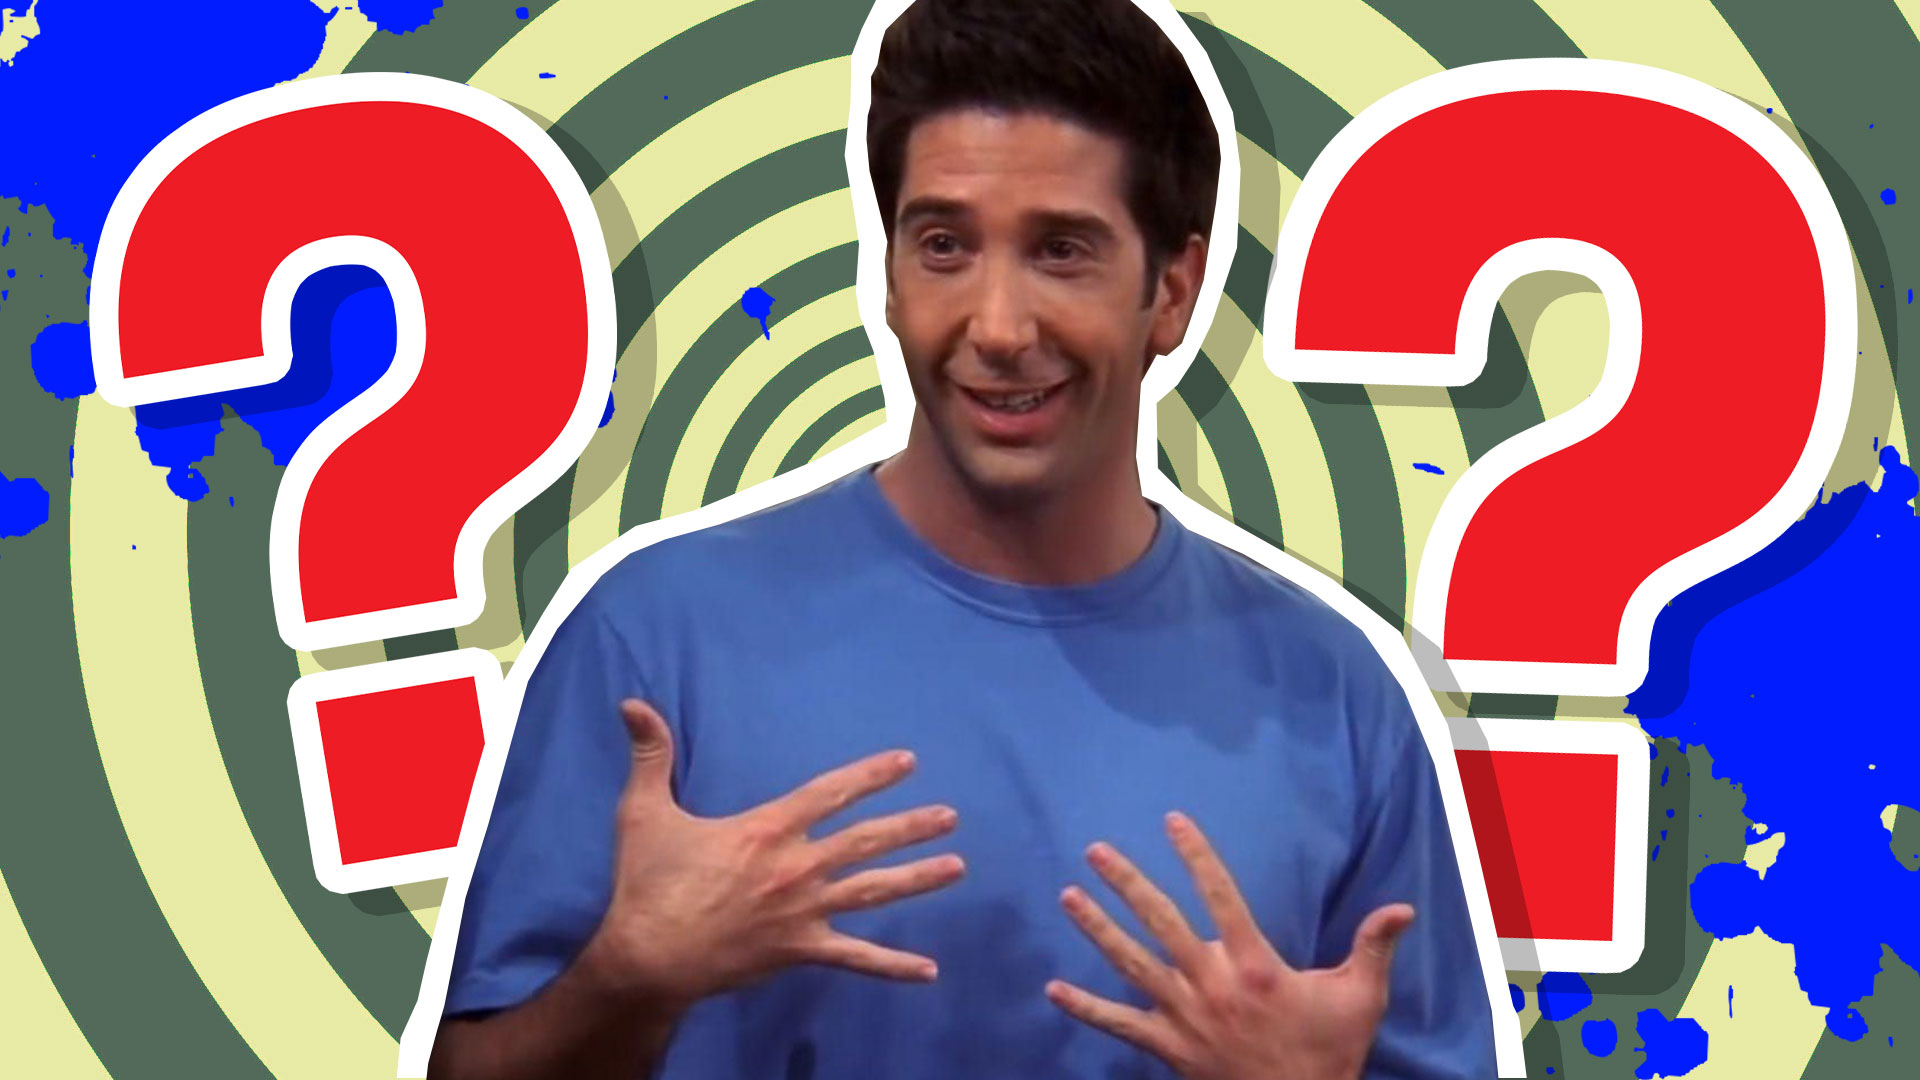 What Percentage Ross Geller are You?